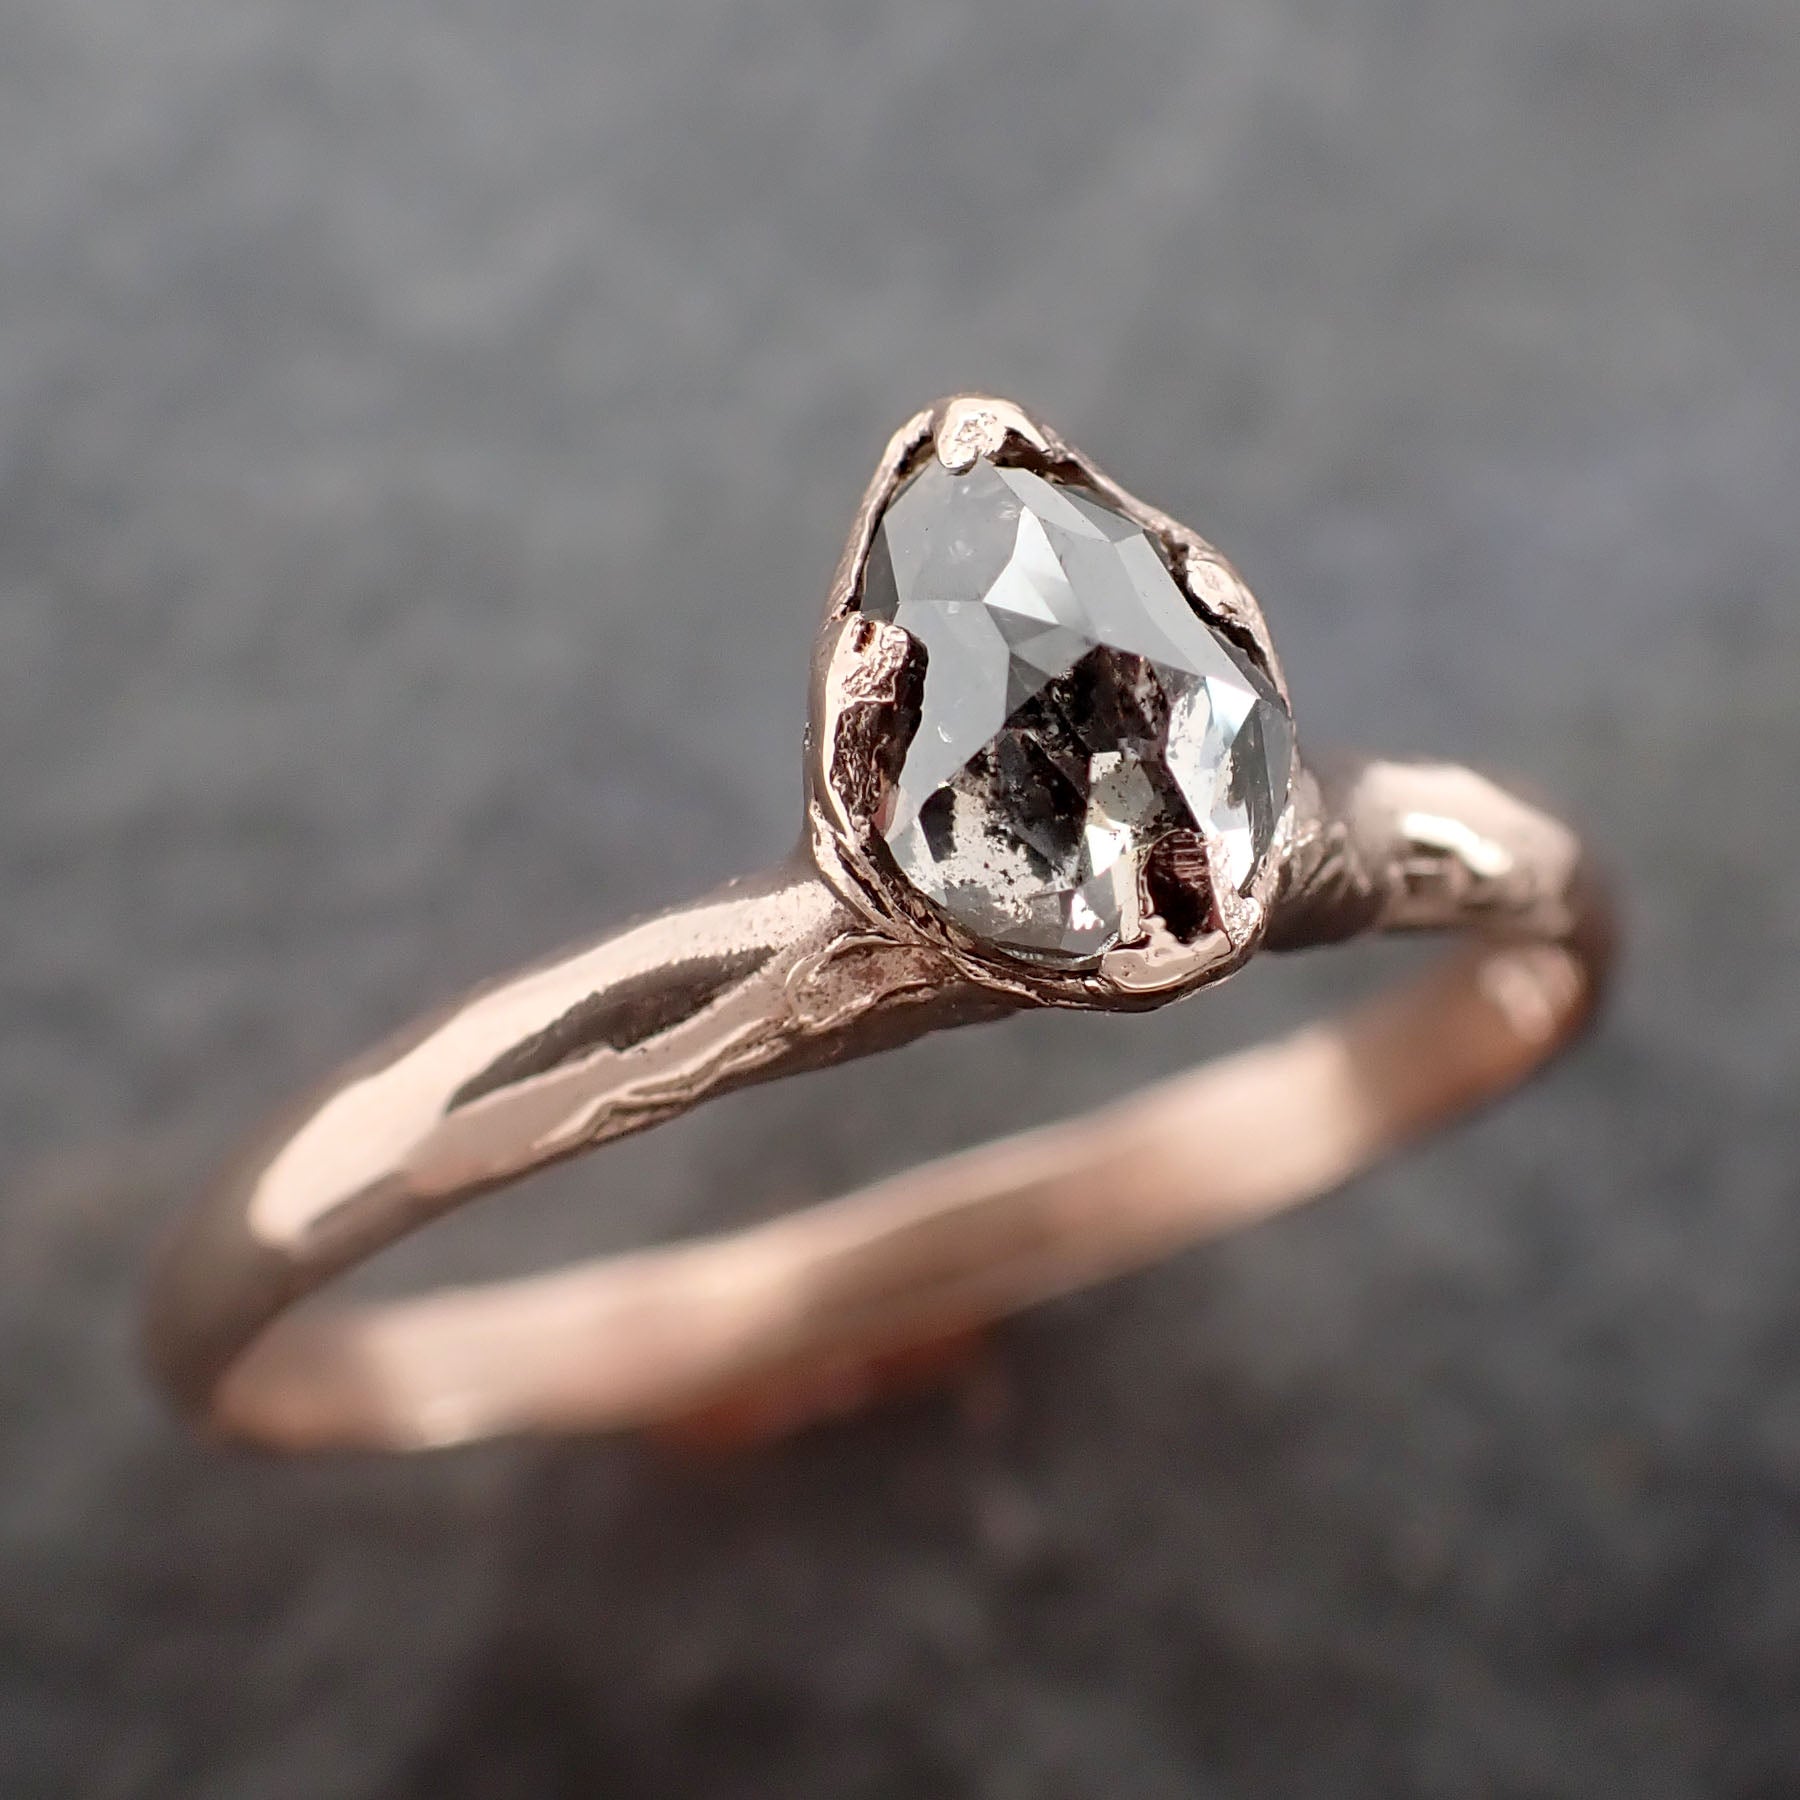 Faceted Fancy cut Salt and Pepper Diamond Solitaire Engagement 14k Rose Gold Wedding Ring byAngeline 2586